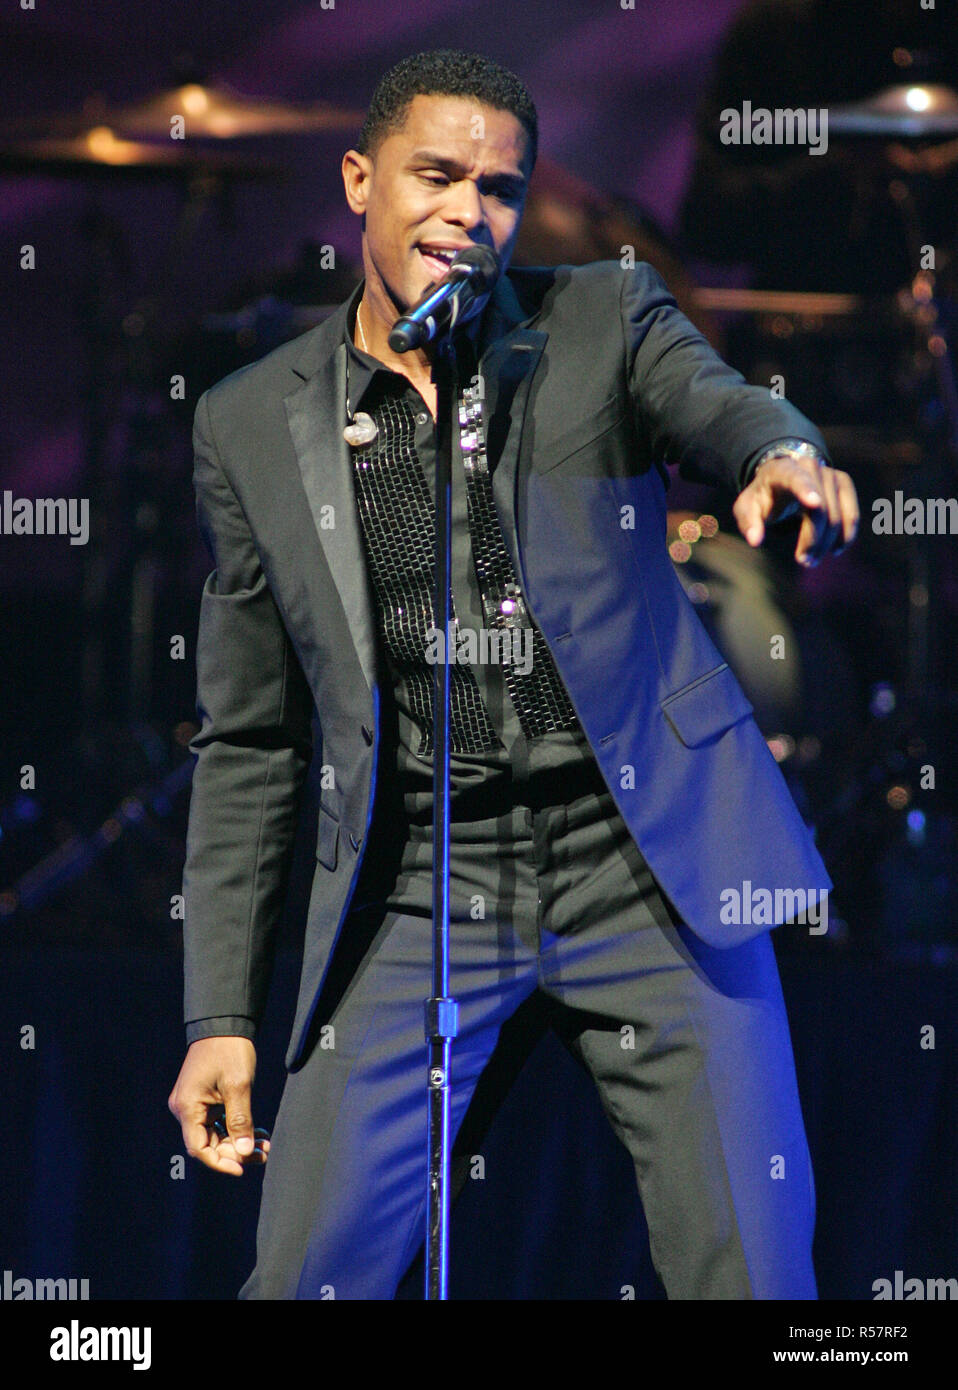 R & B singer Maxwell performs in concert at the American Airlines Arena